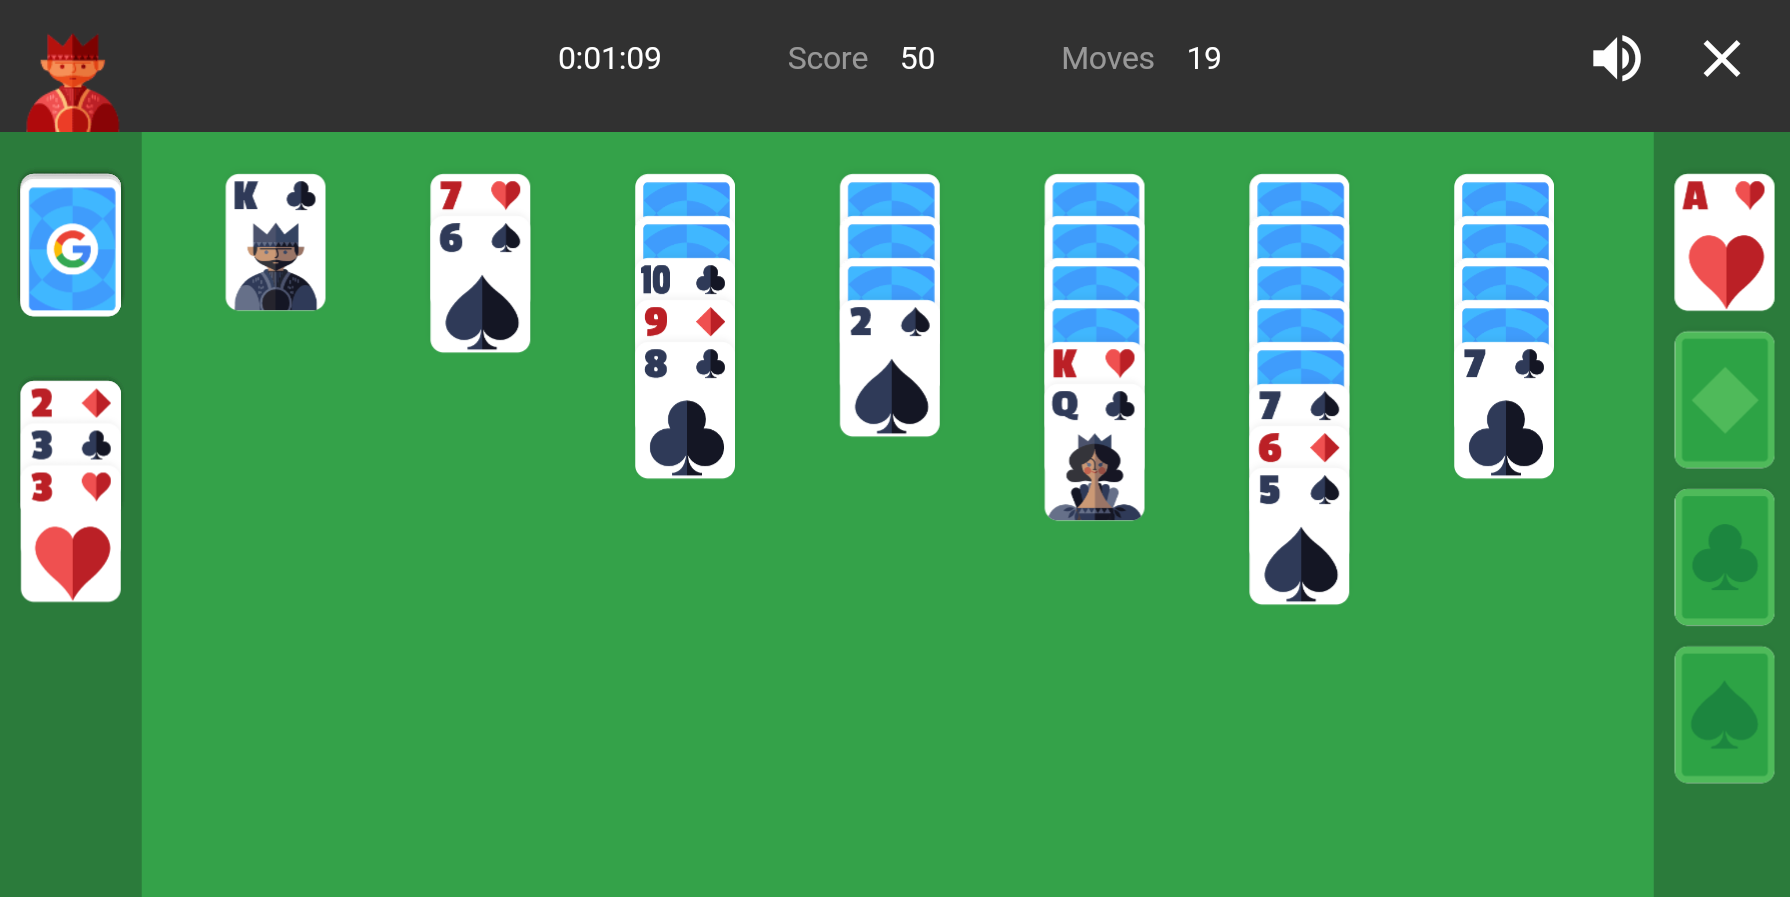 Goodbye productivity! You can now play 'Solitaire' and 'Tic-tac